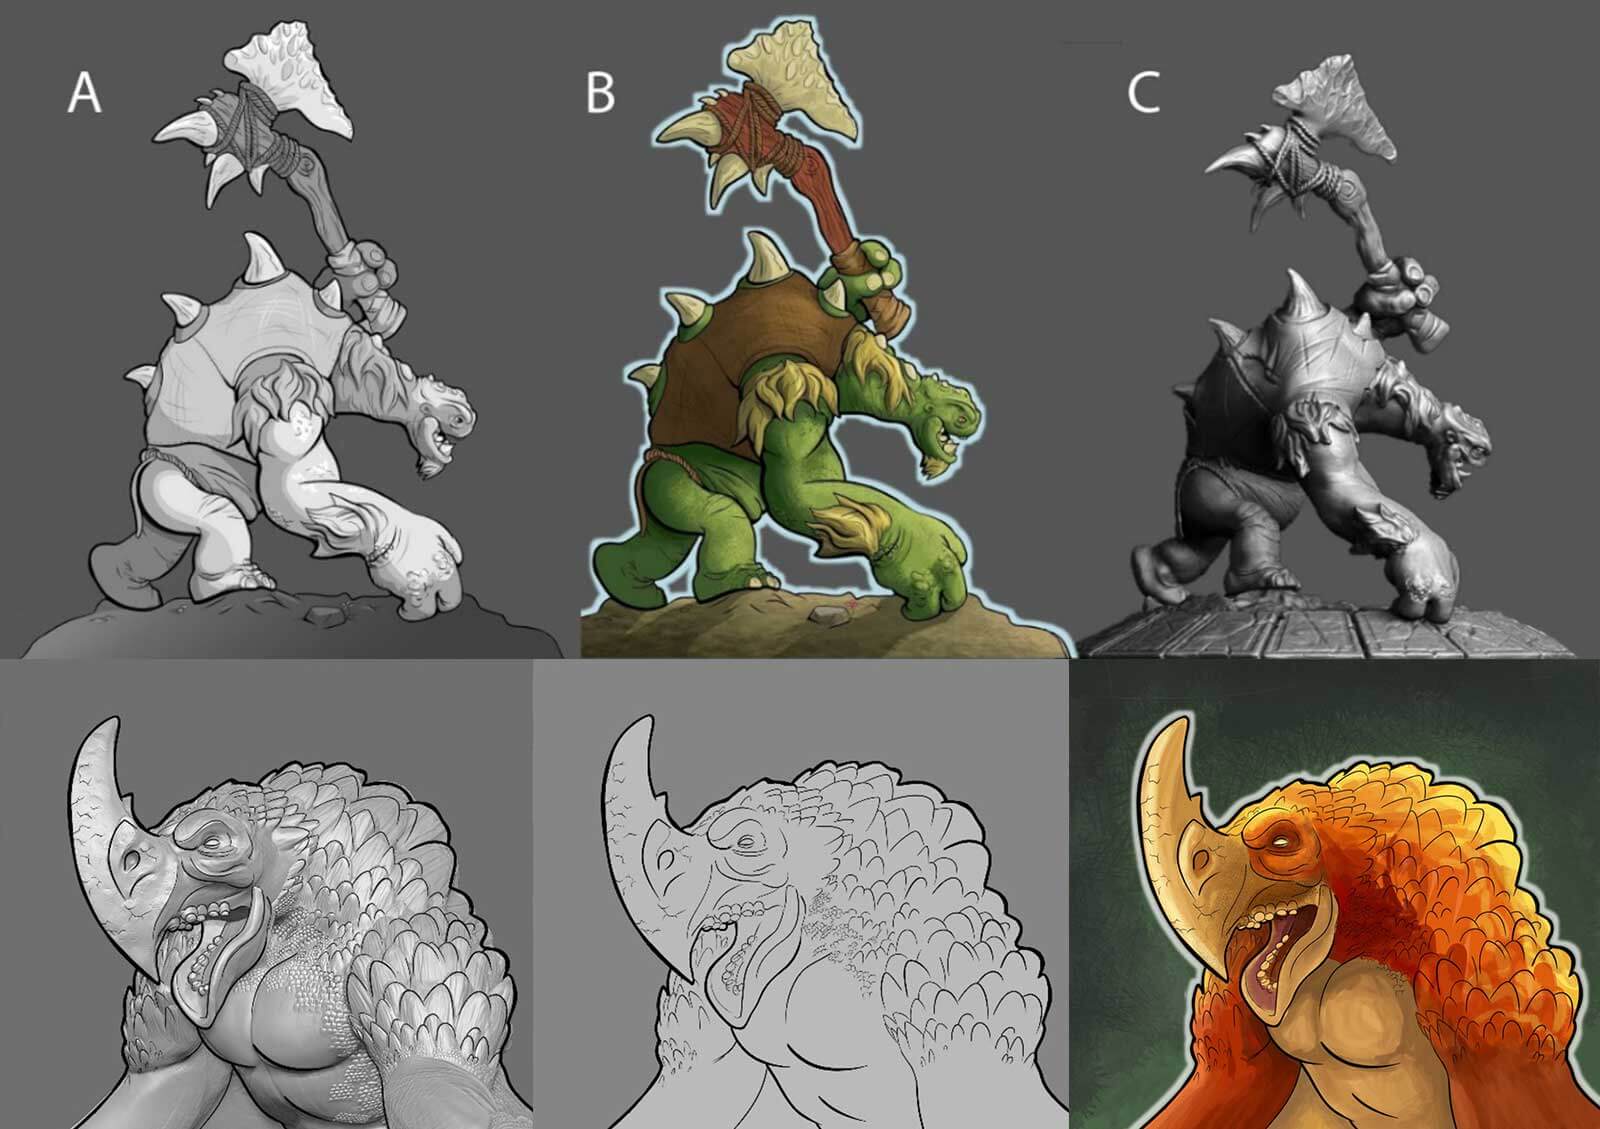 Gray 2D, colored 2D, and gray 3D renders of a green orc with an ax, and an orange monster.